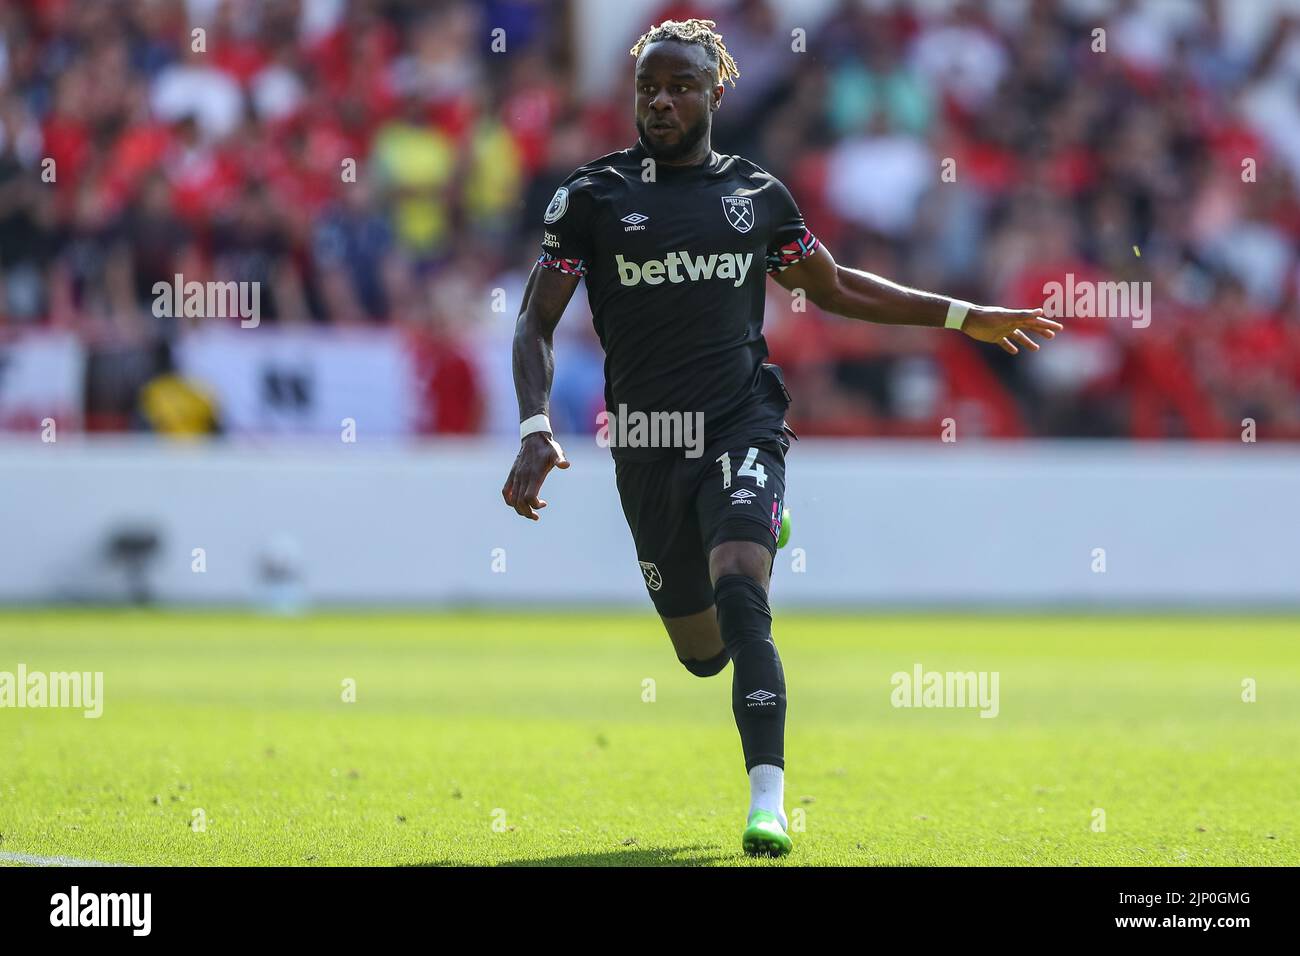 Maxwel Cornet #14 of West Ham United during the game Stock Photo